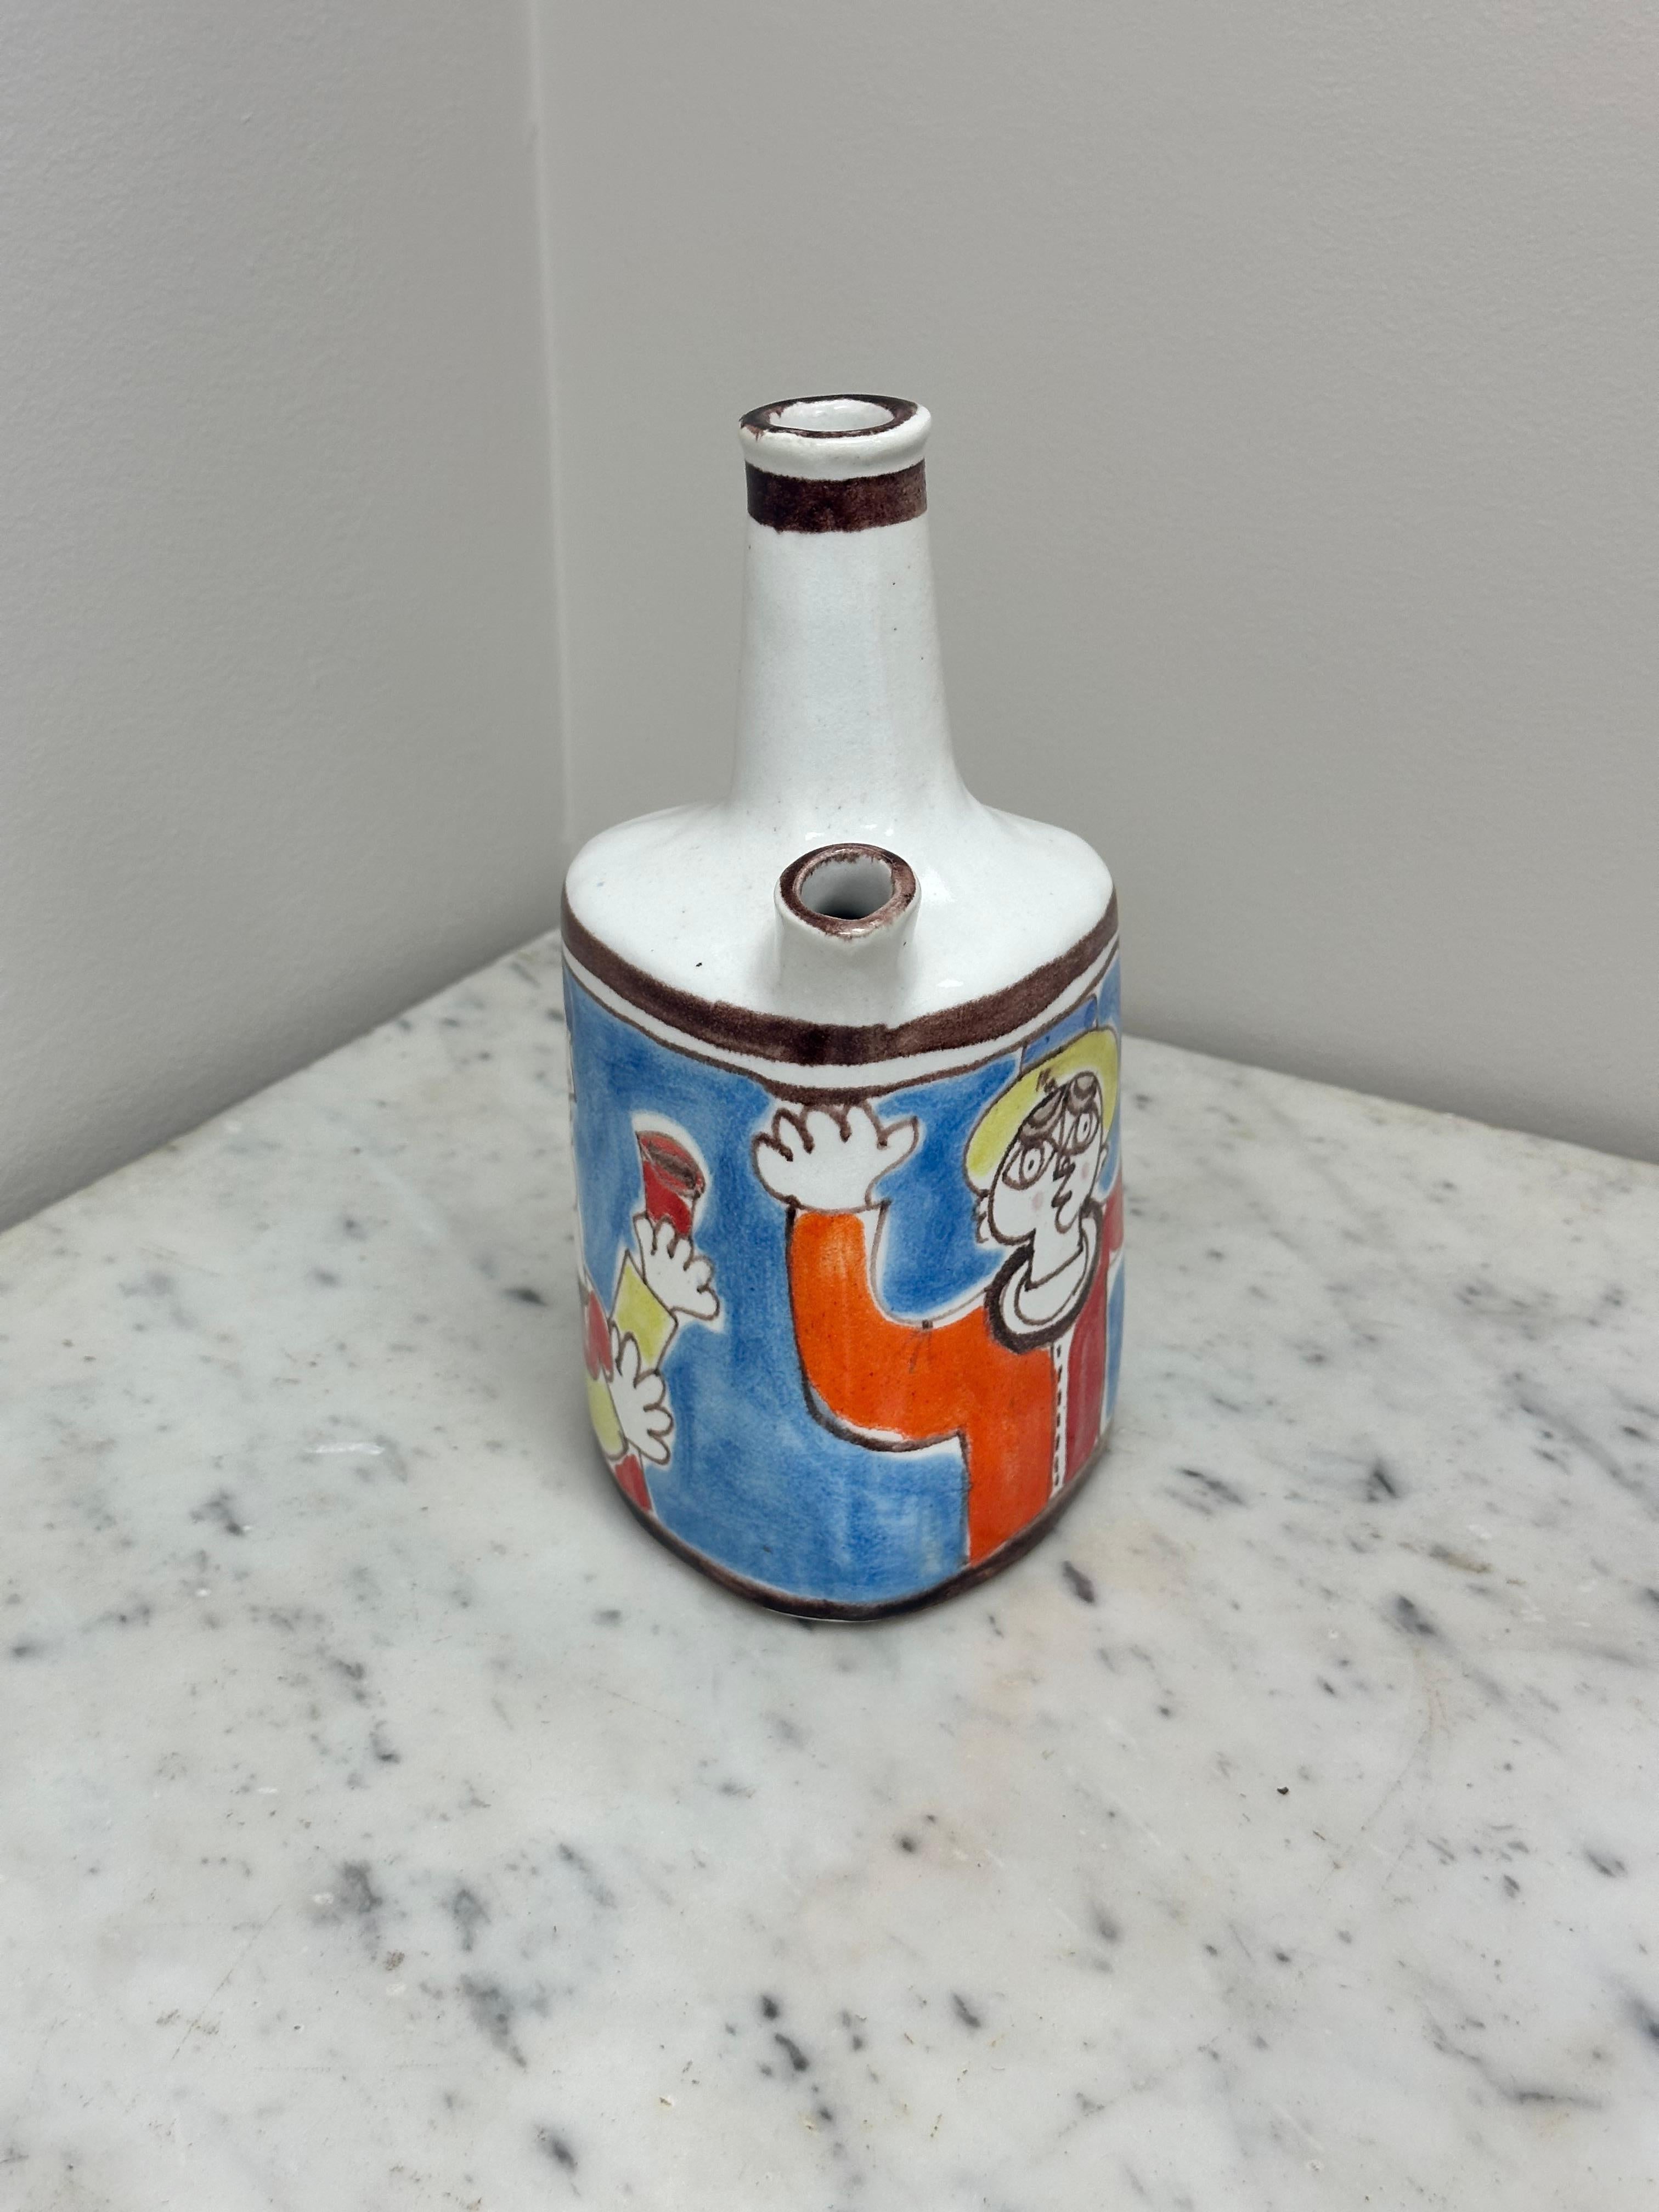 Giovanni de Simone Hand-Painted Jug Vase In Good Condition For Sale In Skokie, IL